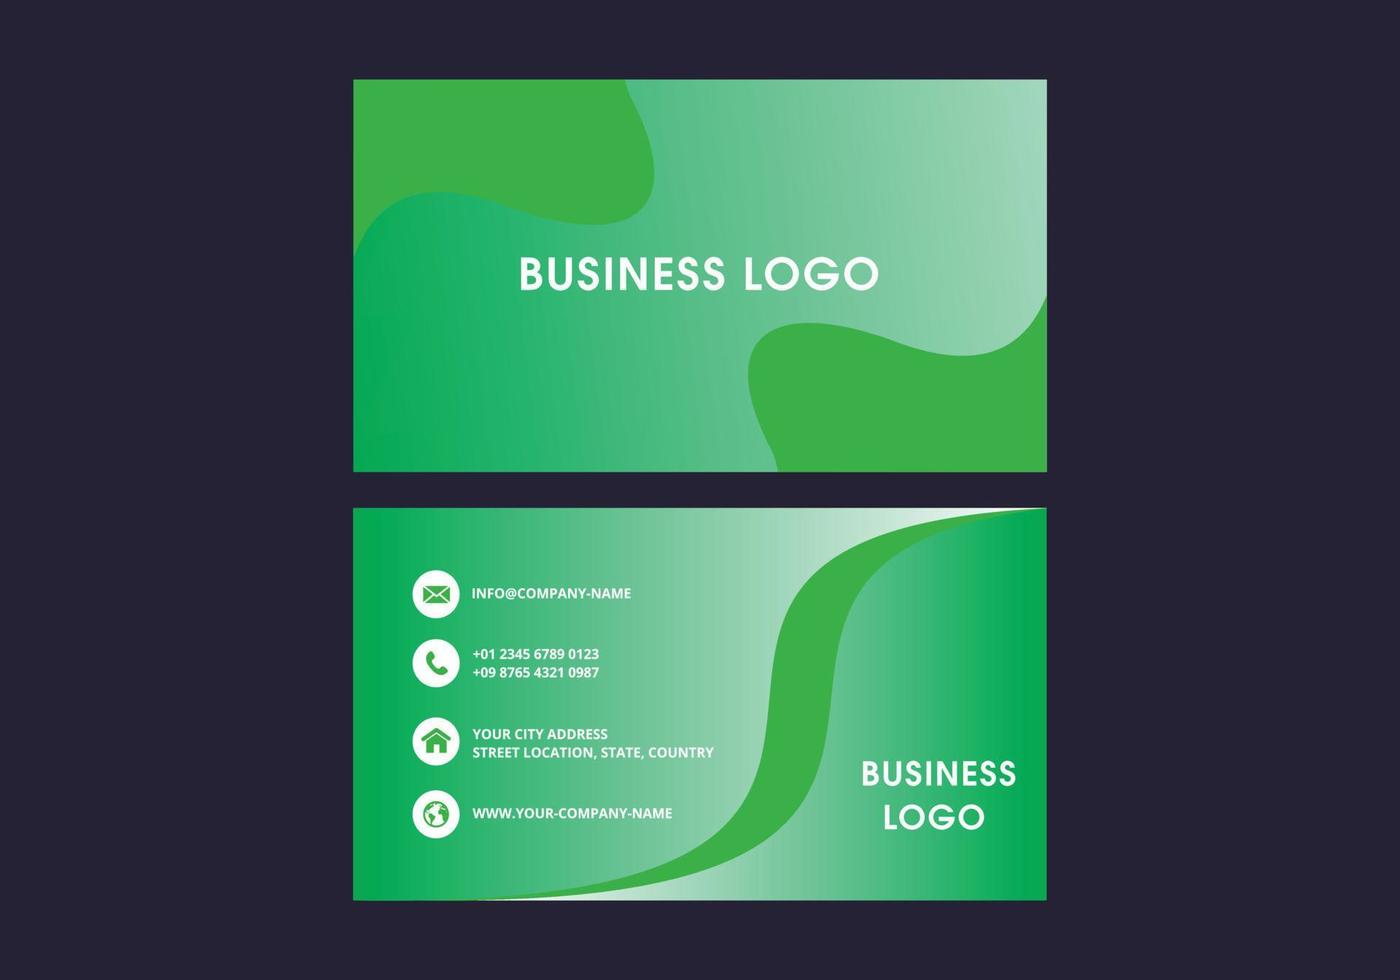 Modern Creative and Clean Business Card Template. Flat Design Vector Illustration. Stationery Design